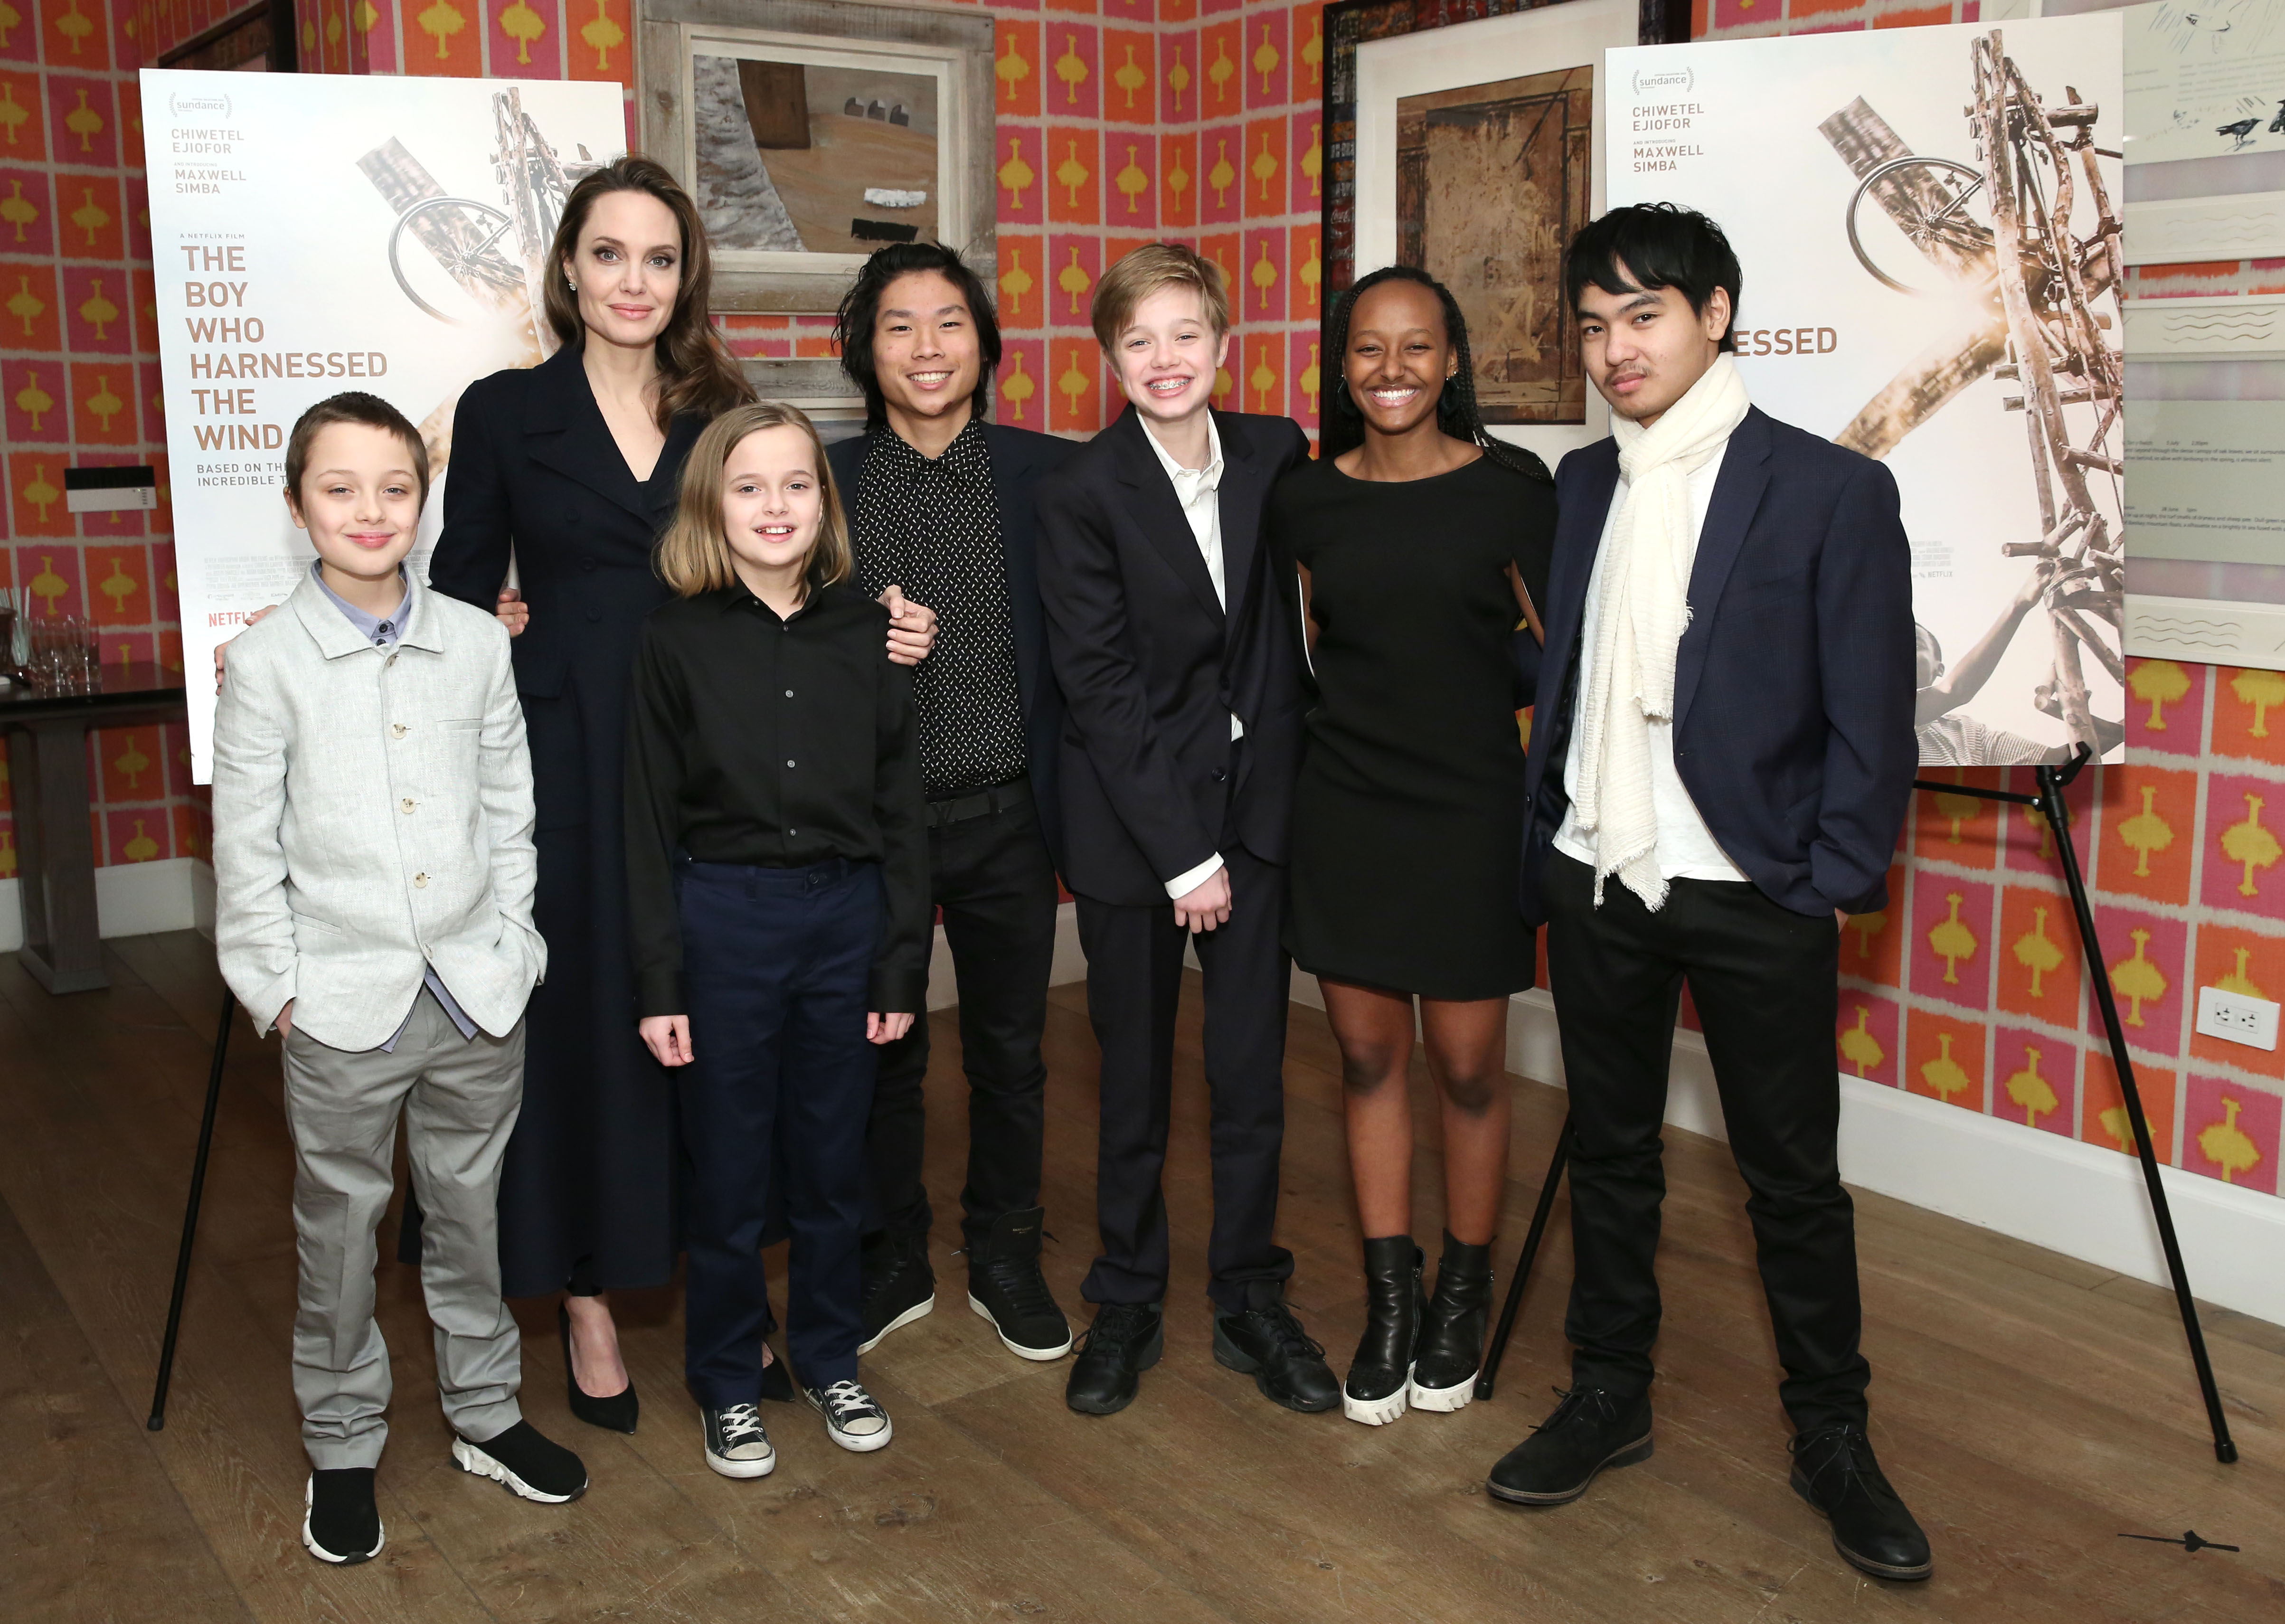 Angelina Jolie, Knox Leon Jolie-Pitt, Vivienne Marcheline Jolie-Pitt, Pax Thien Jolie-Pitt, Shiloh Nouvel Jolie-Pitt, Zahara Marley Jolie-Pitt, and Maddox Chivan Jolie-Pitt attend "The Boy Who Harnessed The Wind" Special Screening in New York City on February 25, 2019 | Source: Getty Images